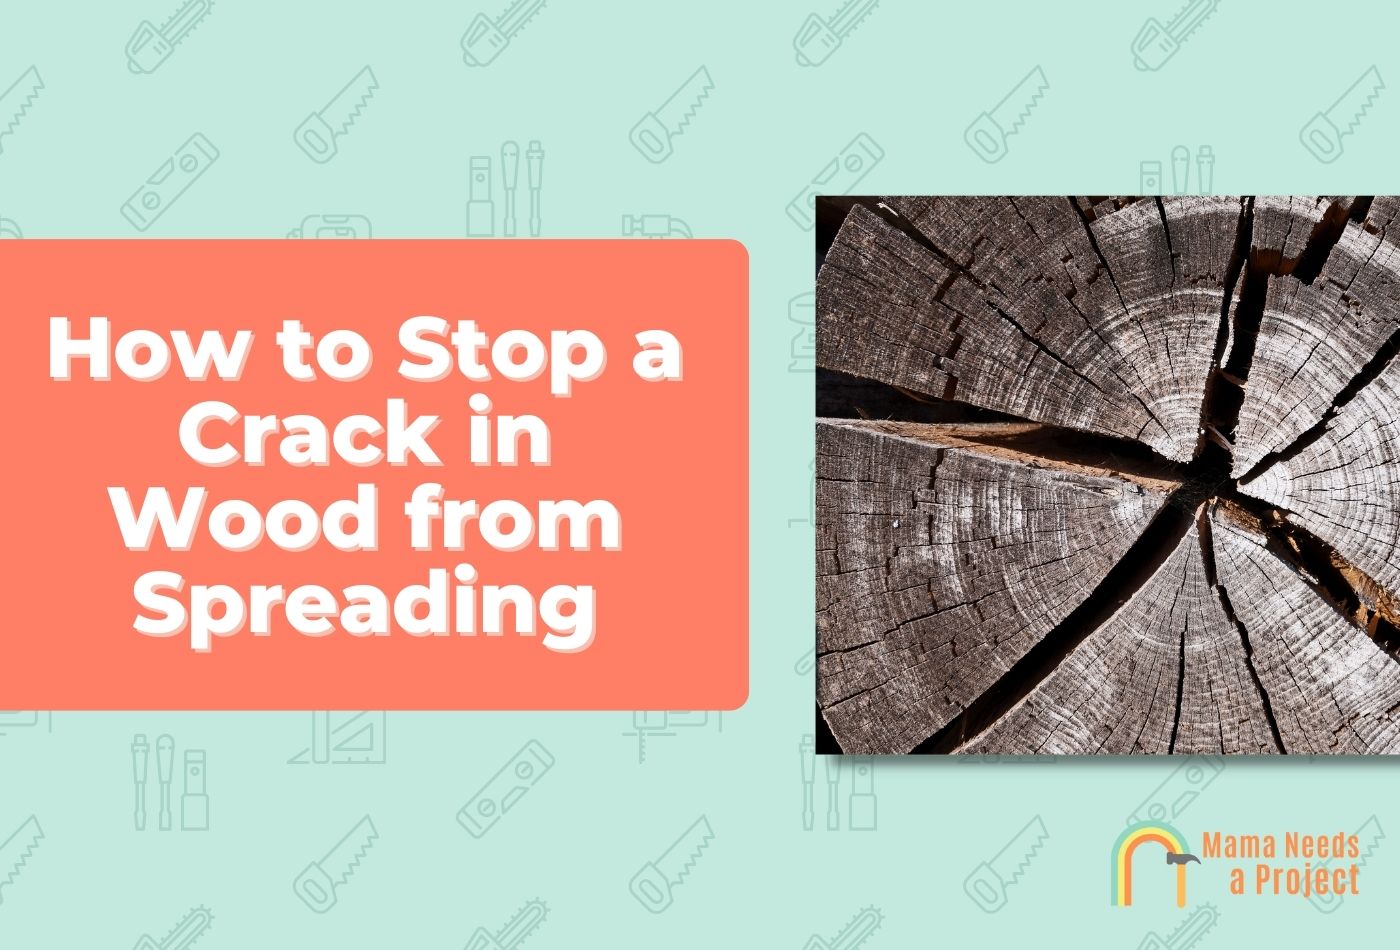 How to Stop a Crack in Wood from Spreading